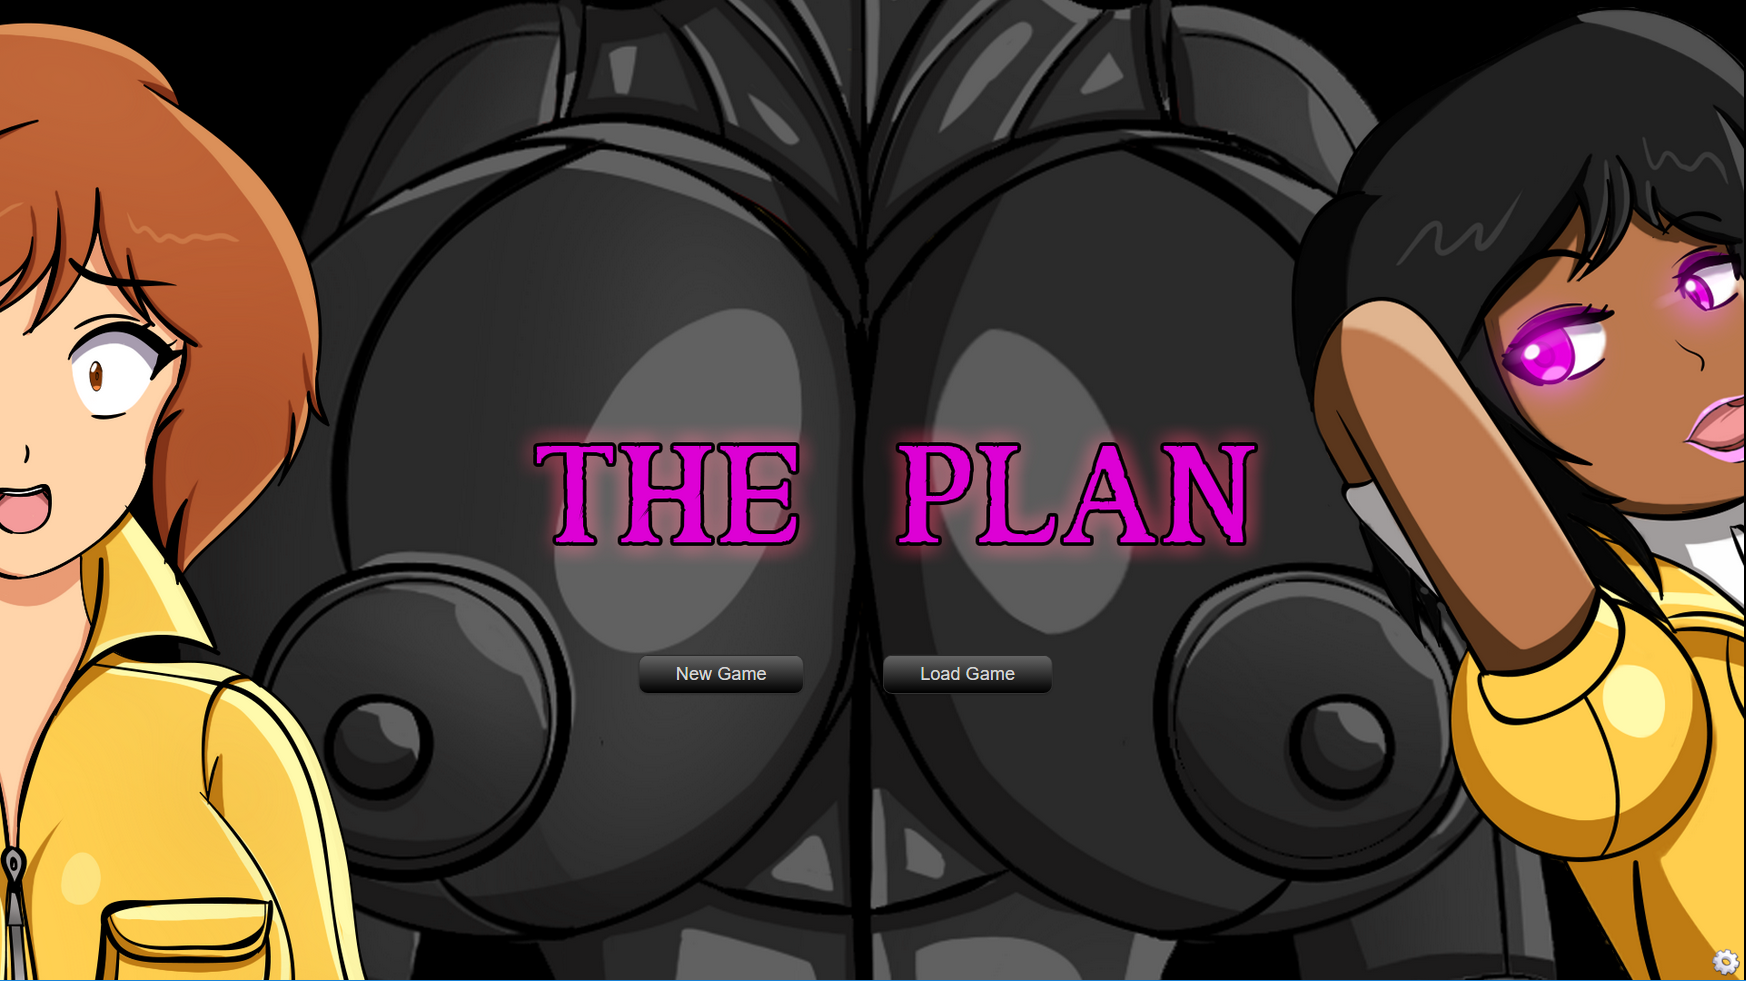 Poan - The Plan â€“ New Version 1.01 (Full Game) - Adult Games Collector